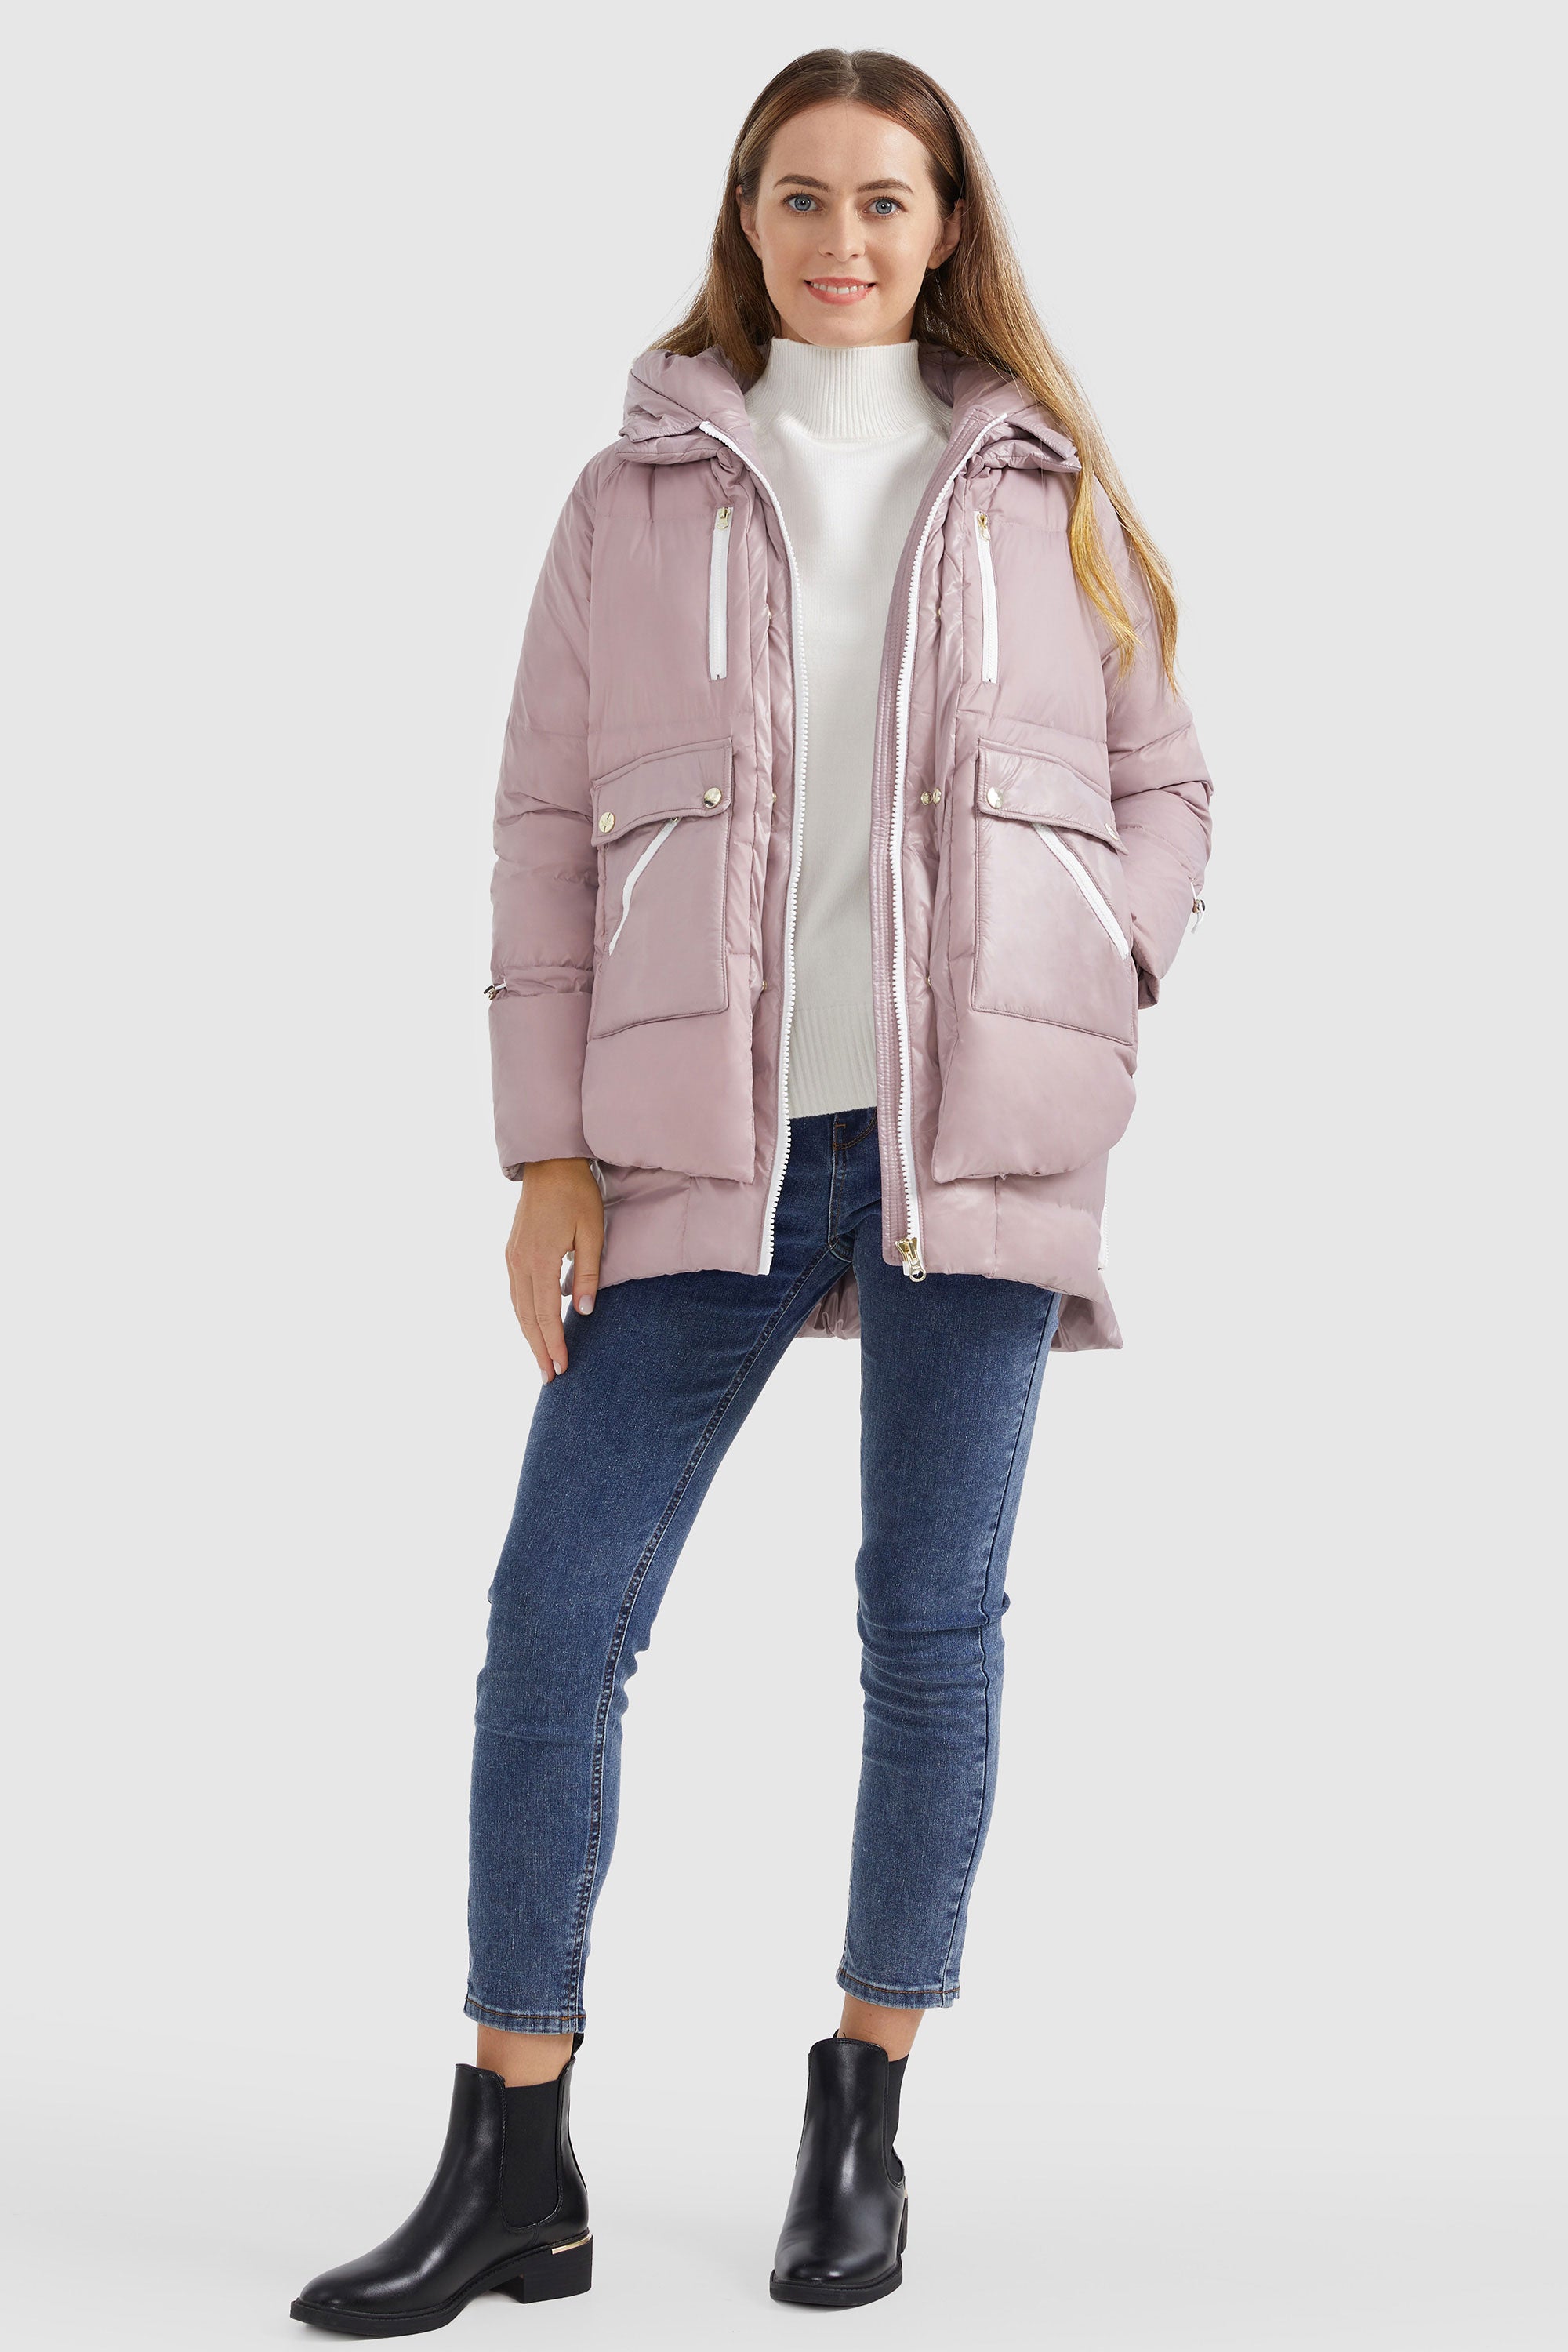 092 Universe Colorlay Cream Colored Thickened Down Jacket